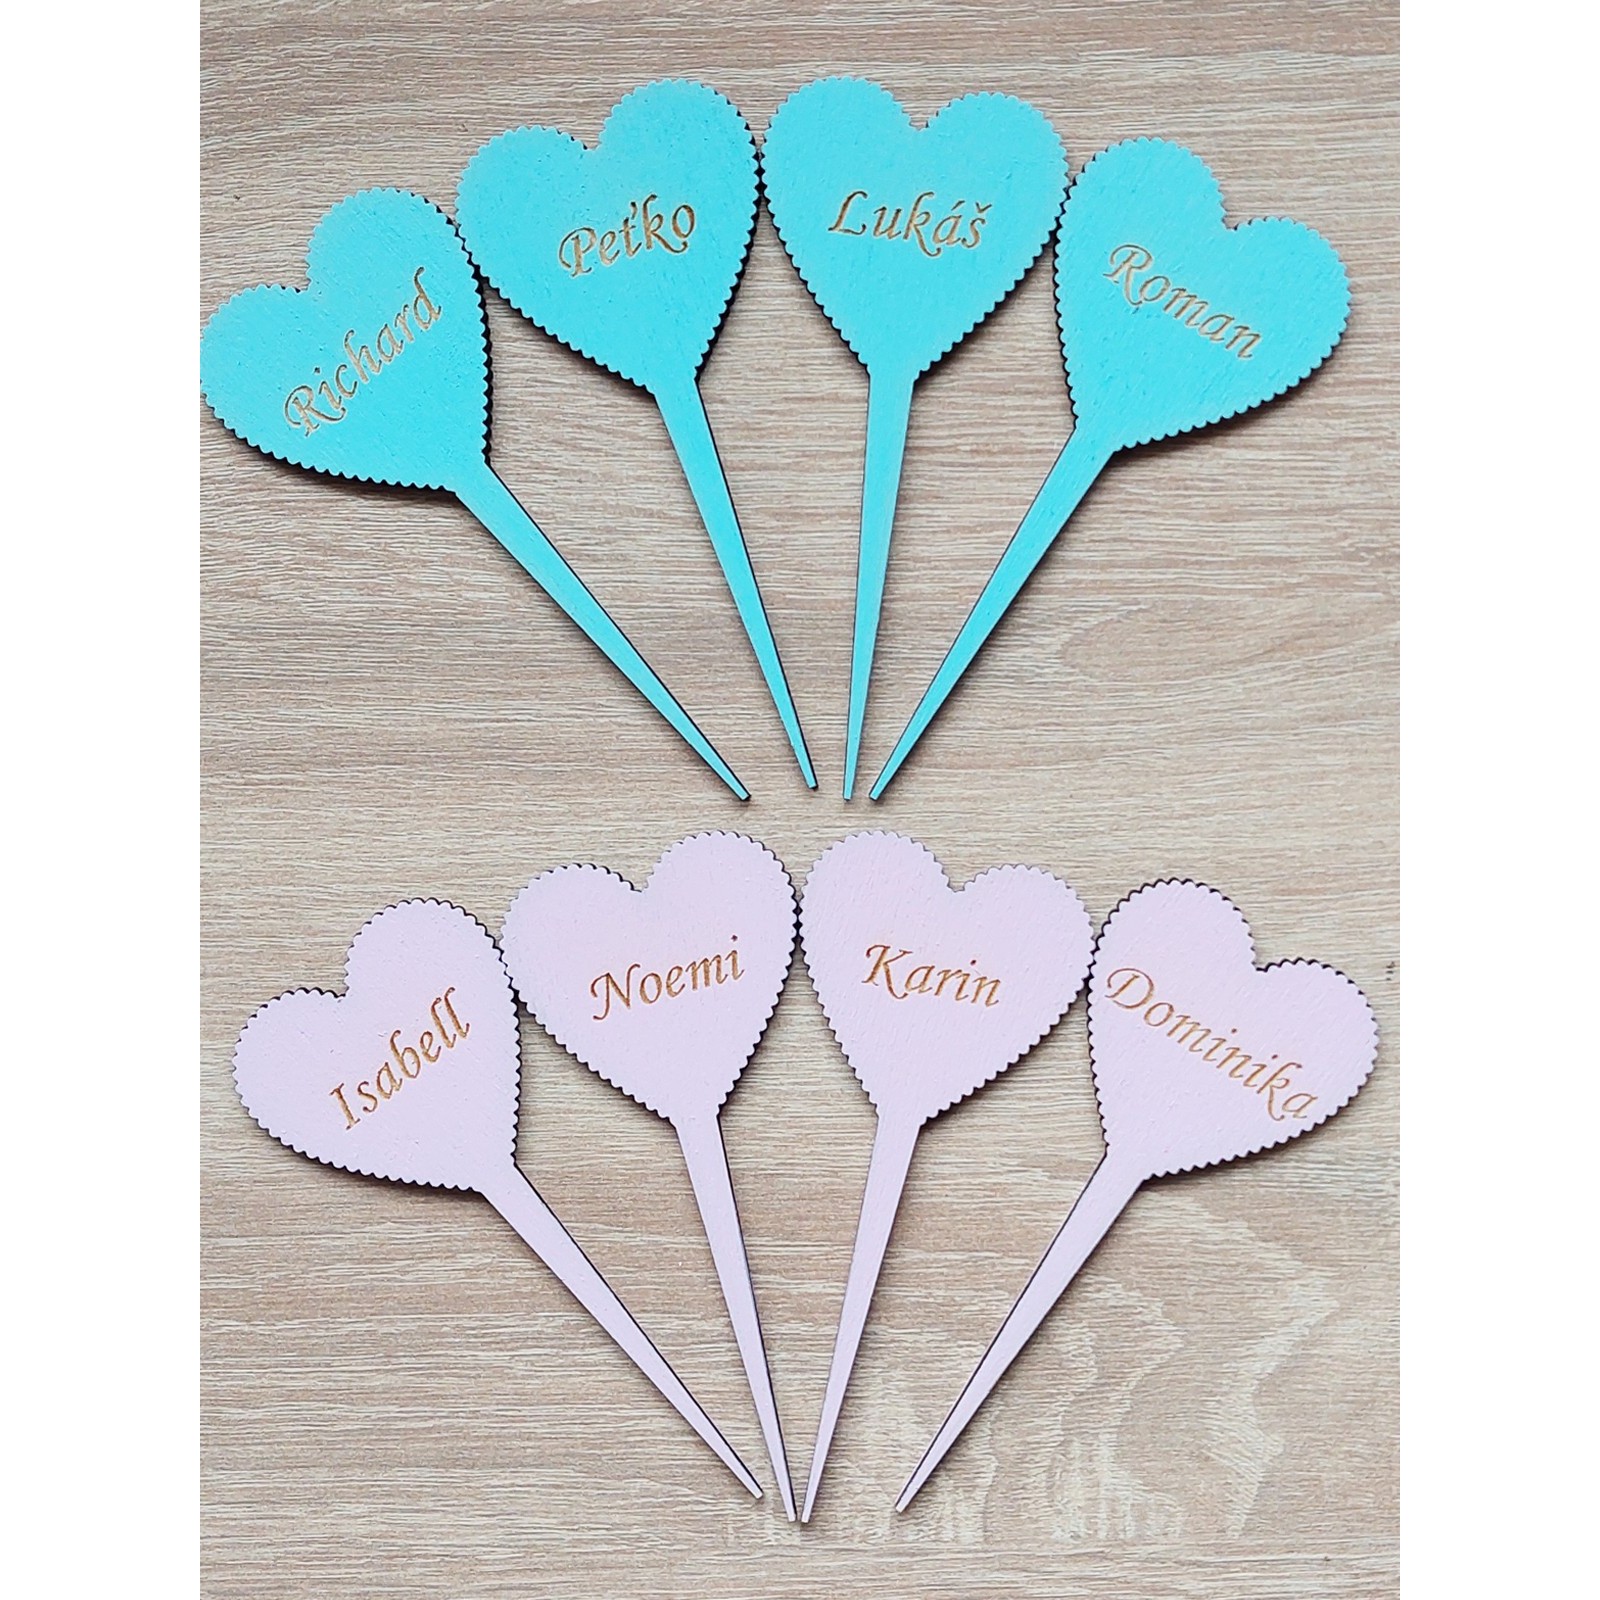 Wooden skewers for small cakes, width 5 cm